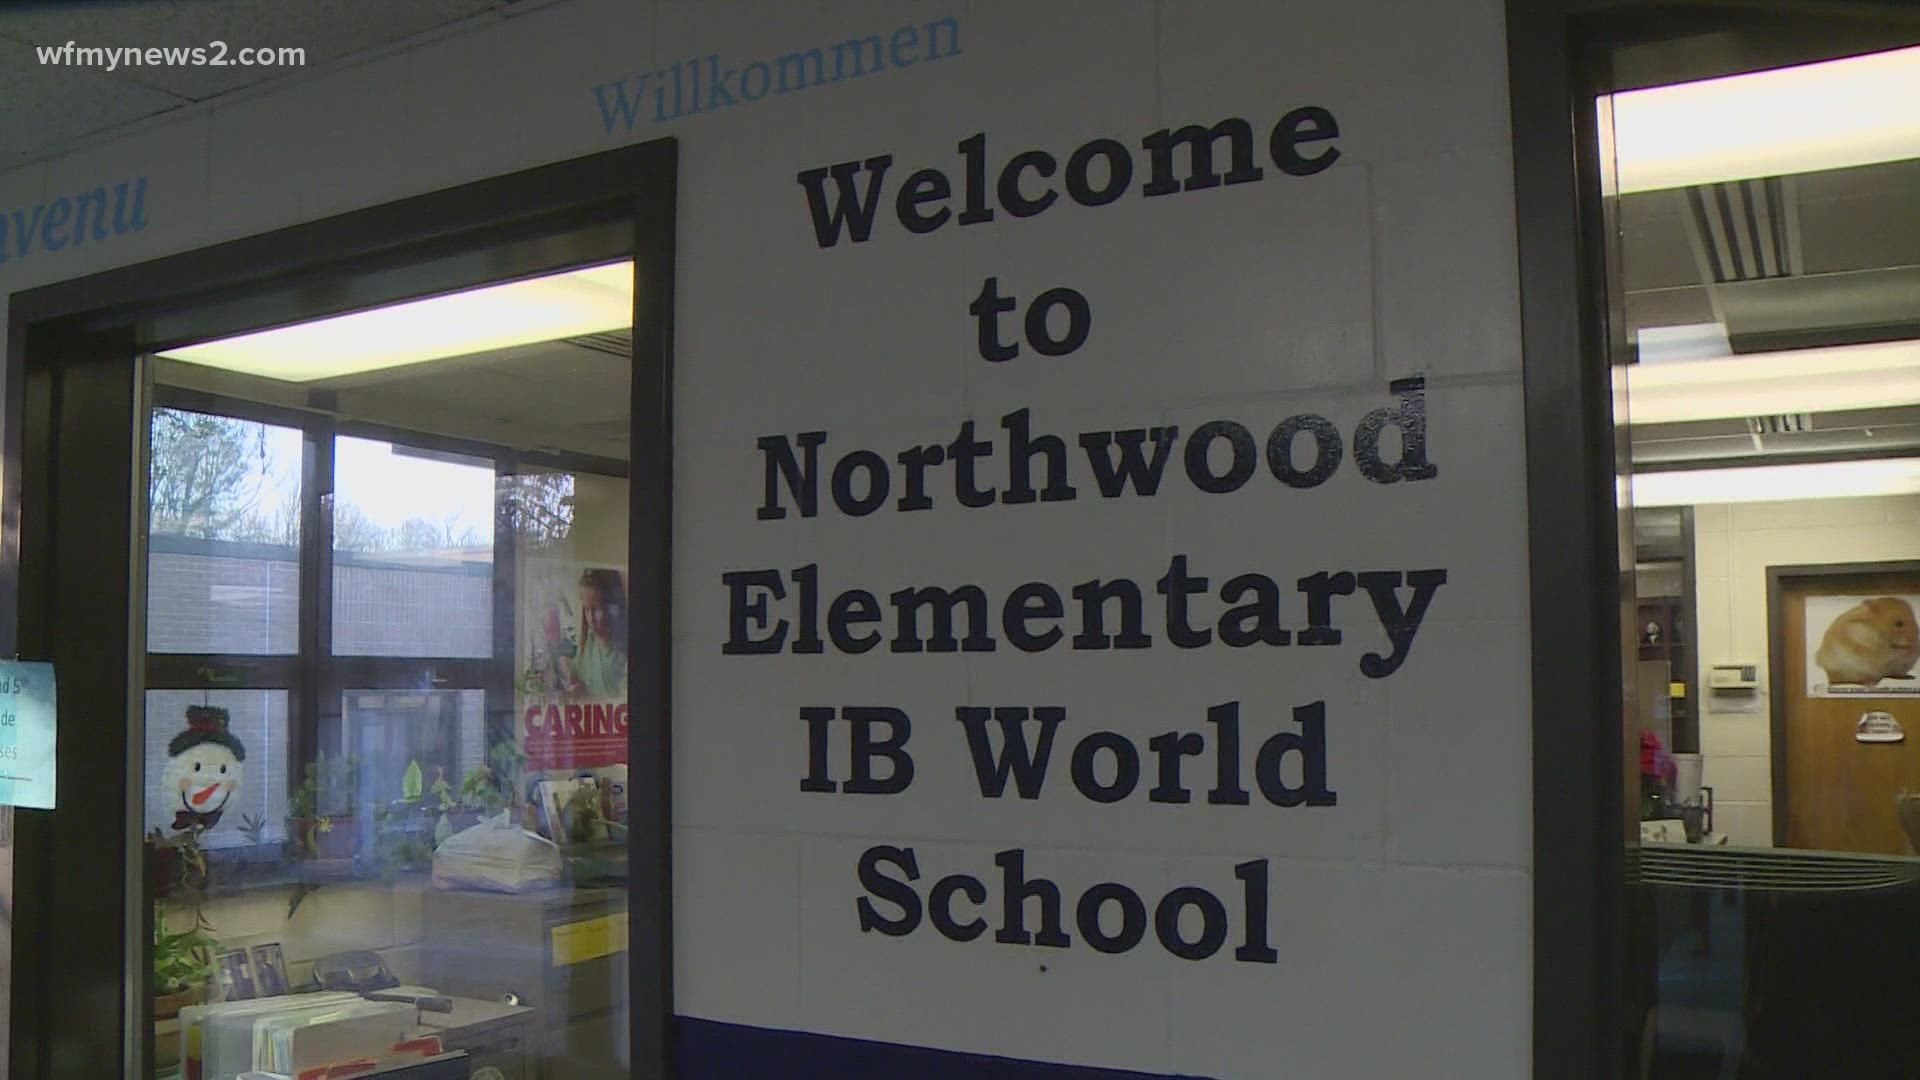 Northwood Elementary is one of the schools that would benefit from a $1.7 billion bond referendum up for vote next year.